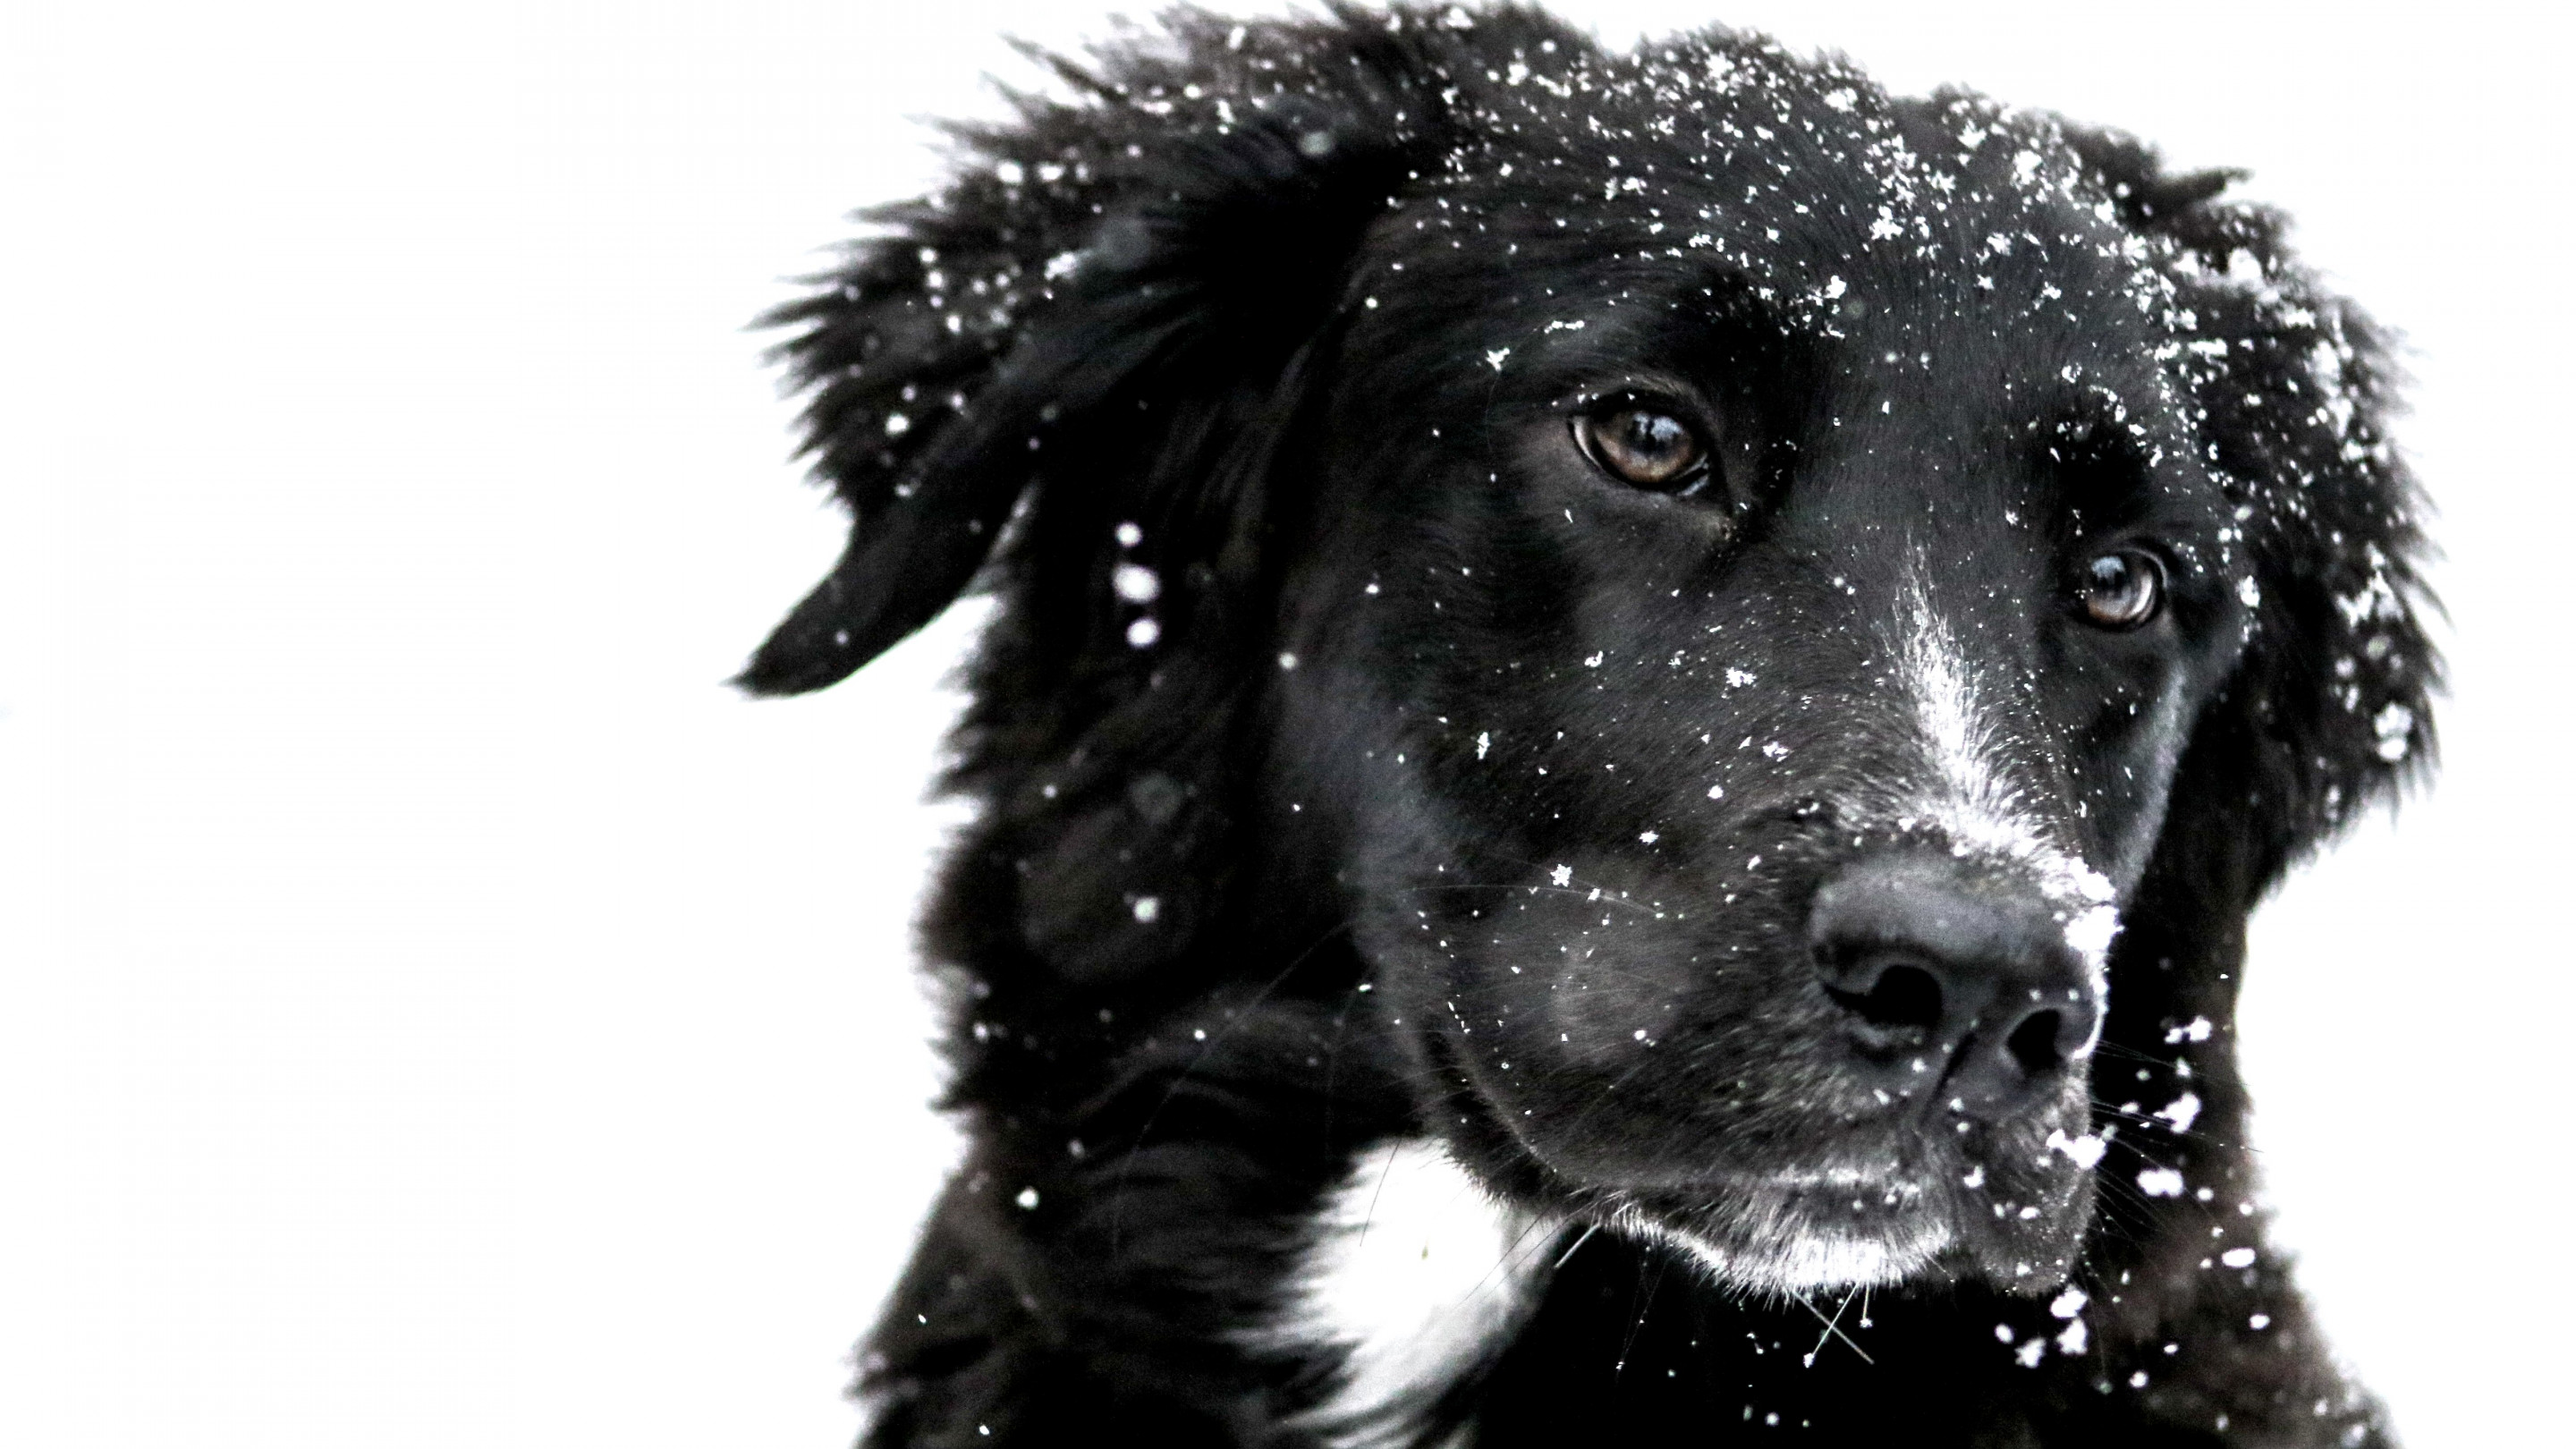 Snowing over the cute dog wallpaper 2880x1620